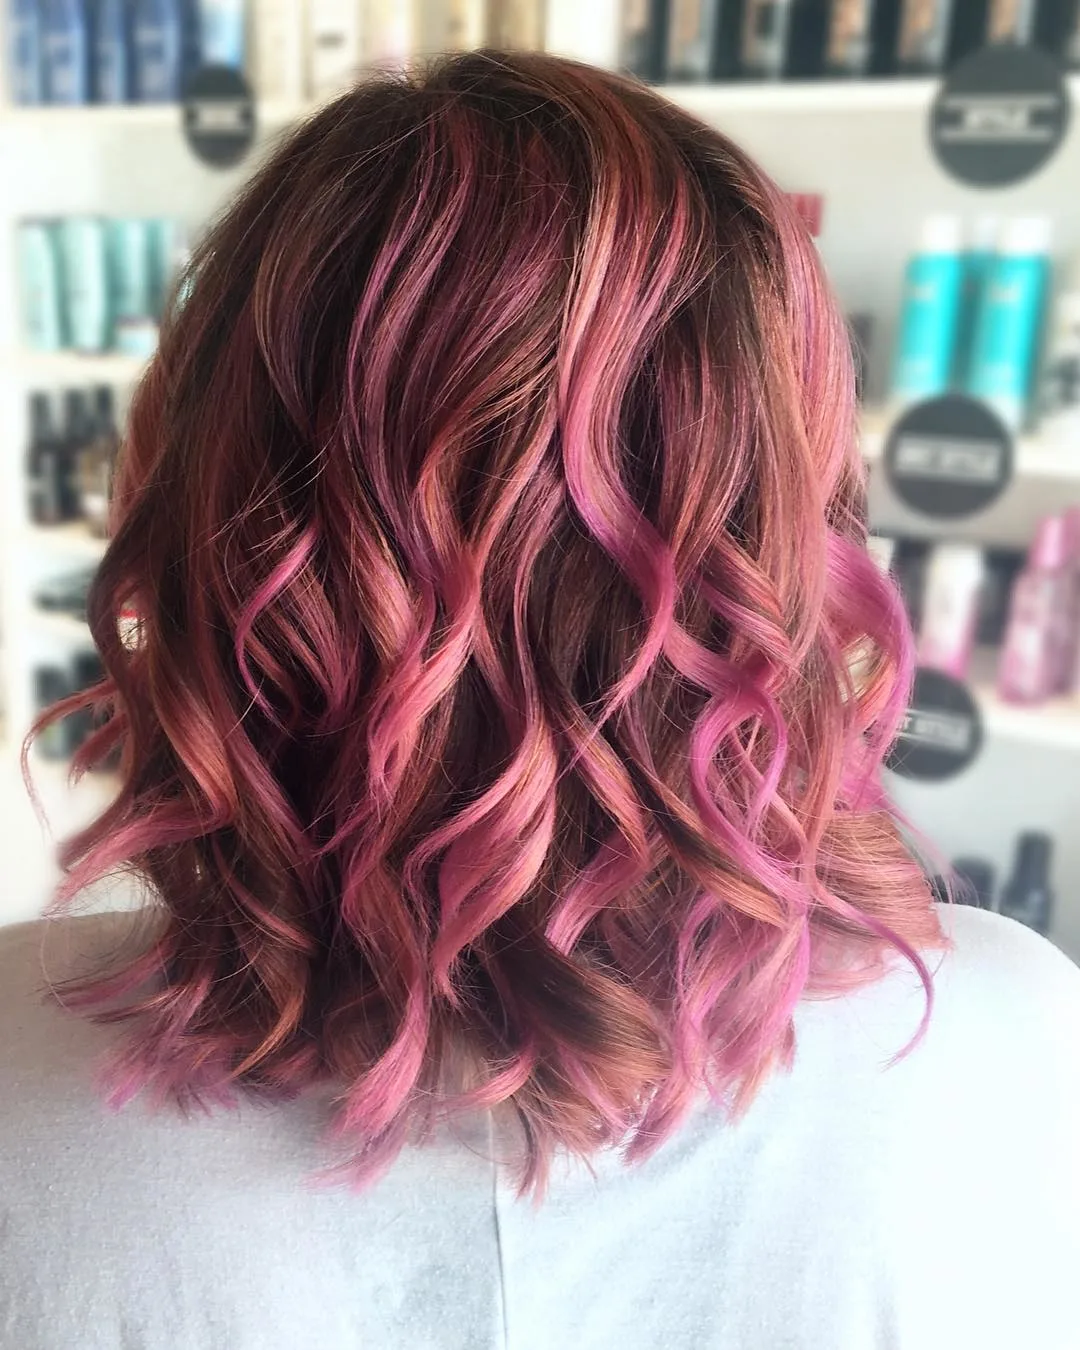 medium length copper waves with pink highlights hairstyle photographed from behind